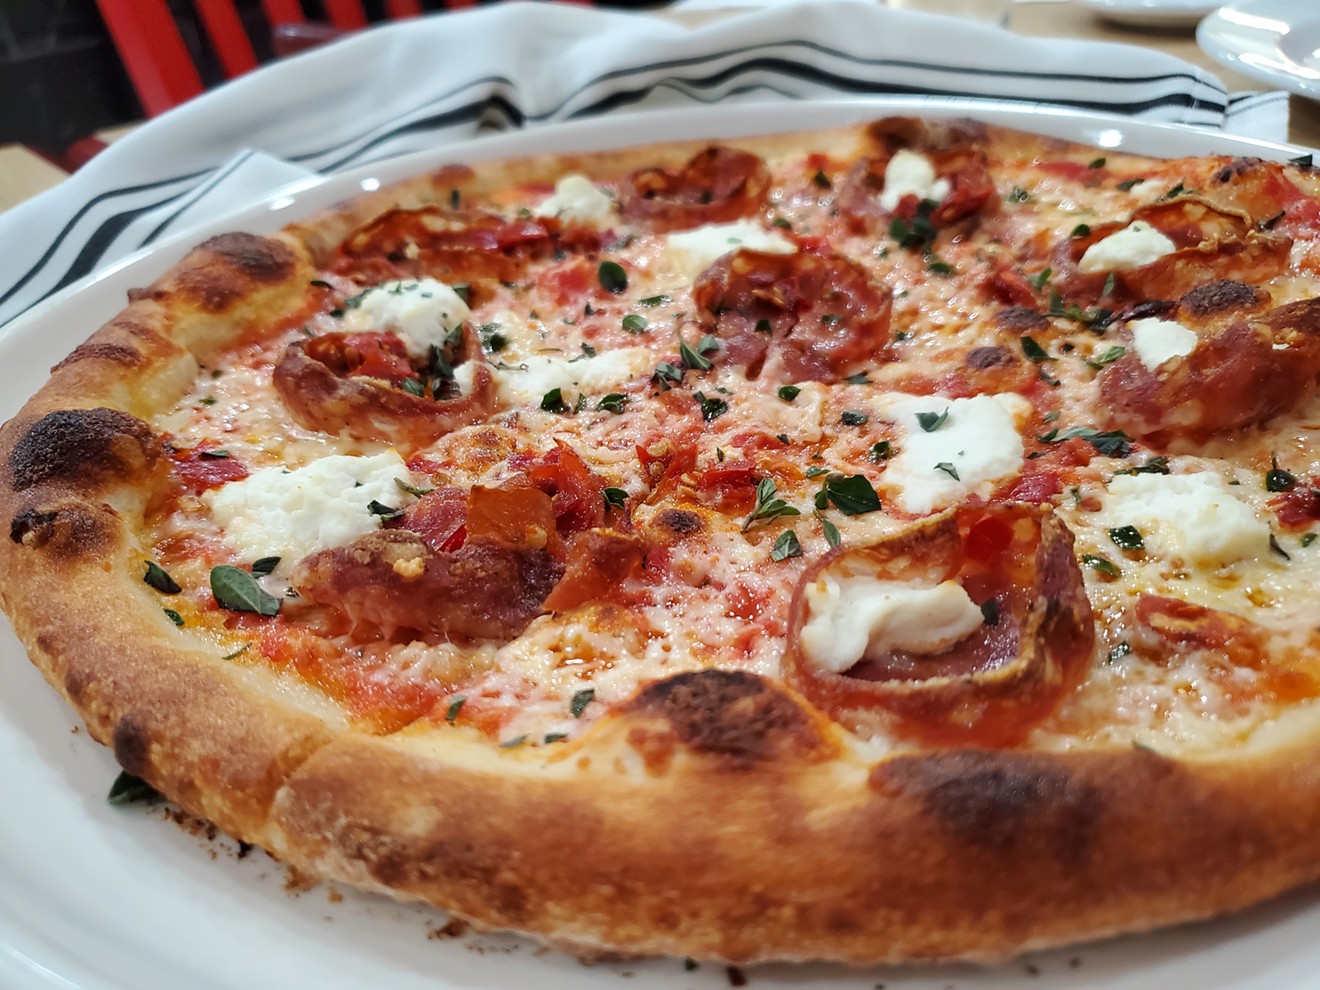 The Diavola pizza with Calabrese salami, ricotta and Calabrian chiles.